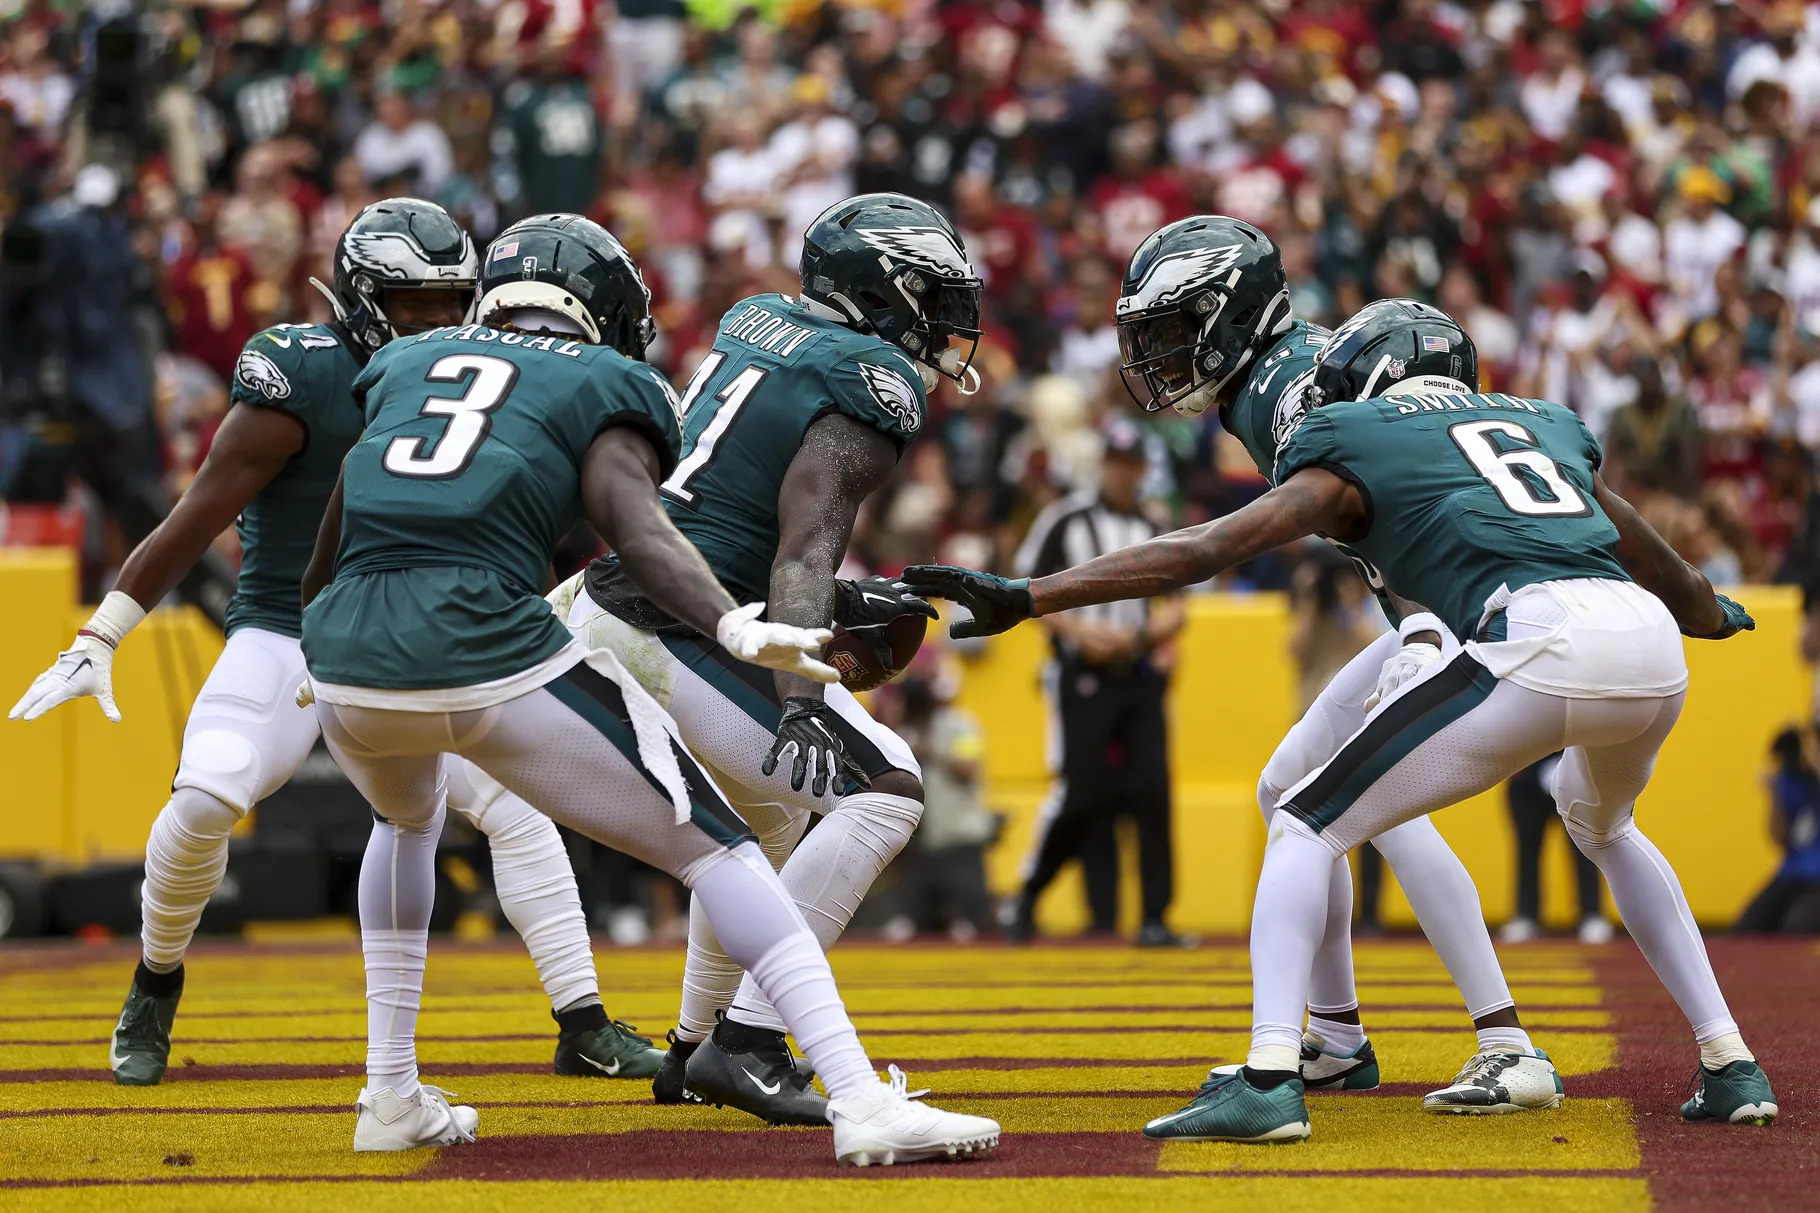 Fly, Eagles Fly!” Eagles are Flying Indeed After 24-8 Win Over Commanders to Remain Undefeated – Celeb Secrets